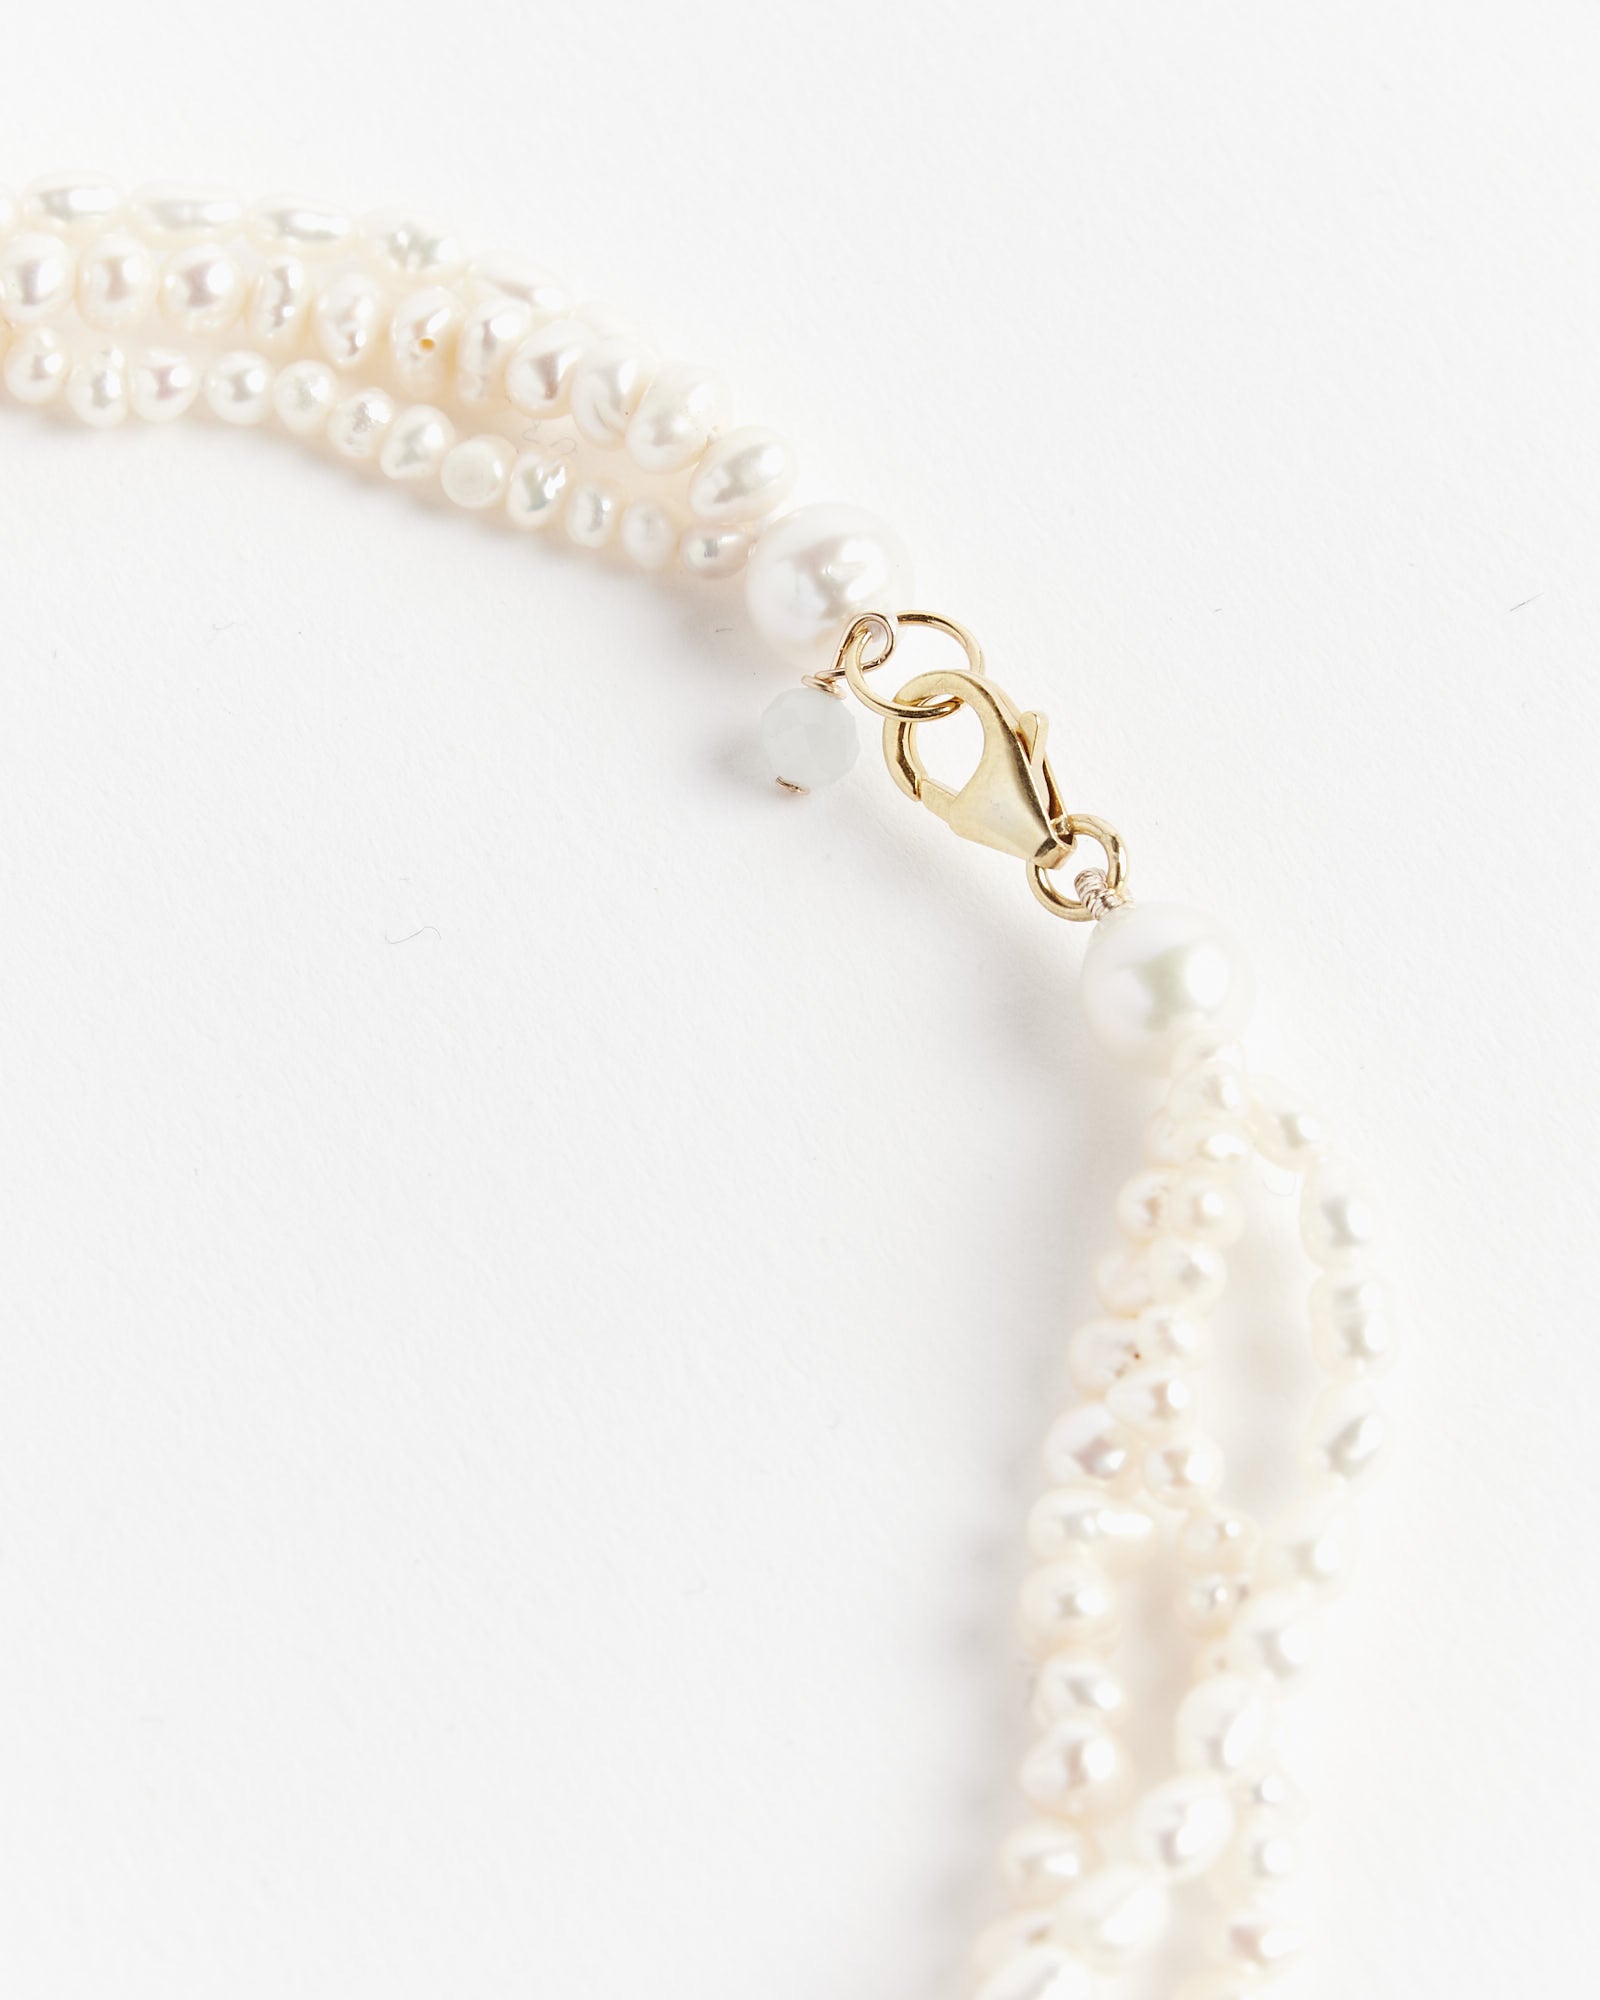 Jula Necklace in Ivory/Gold